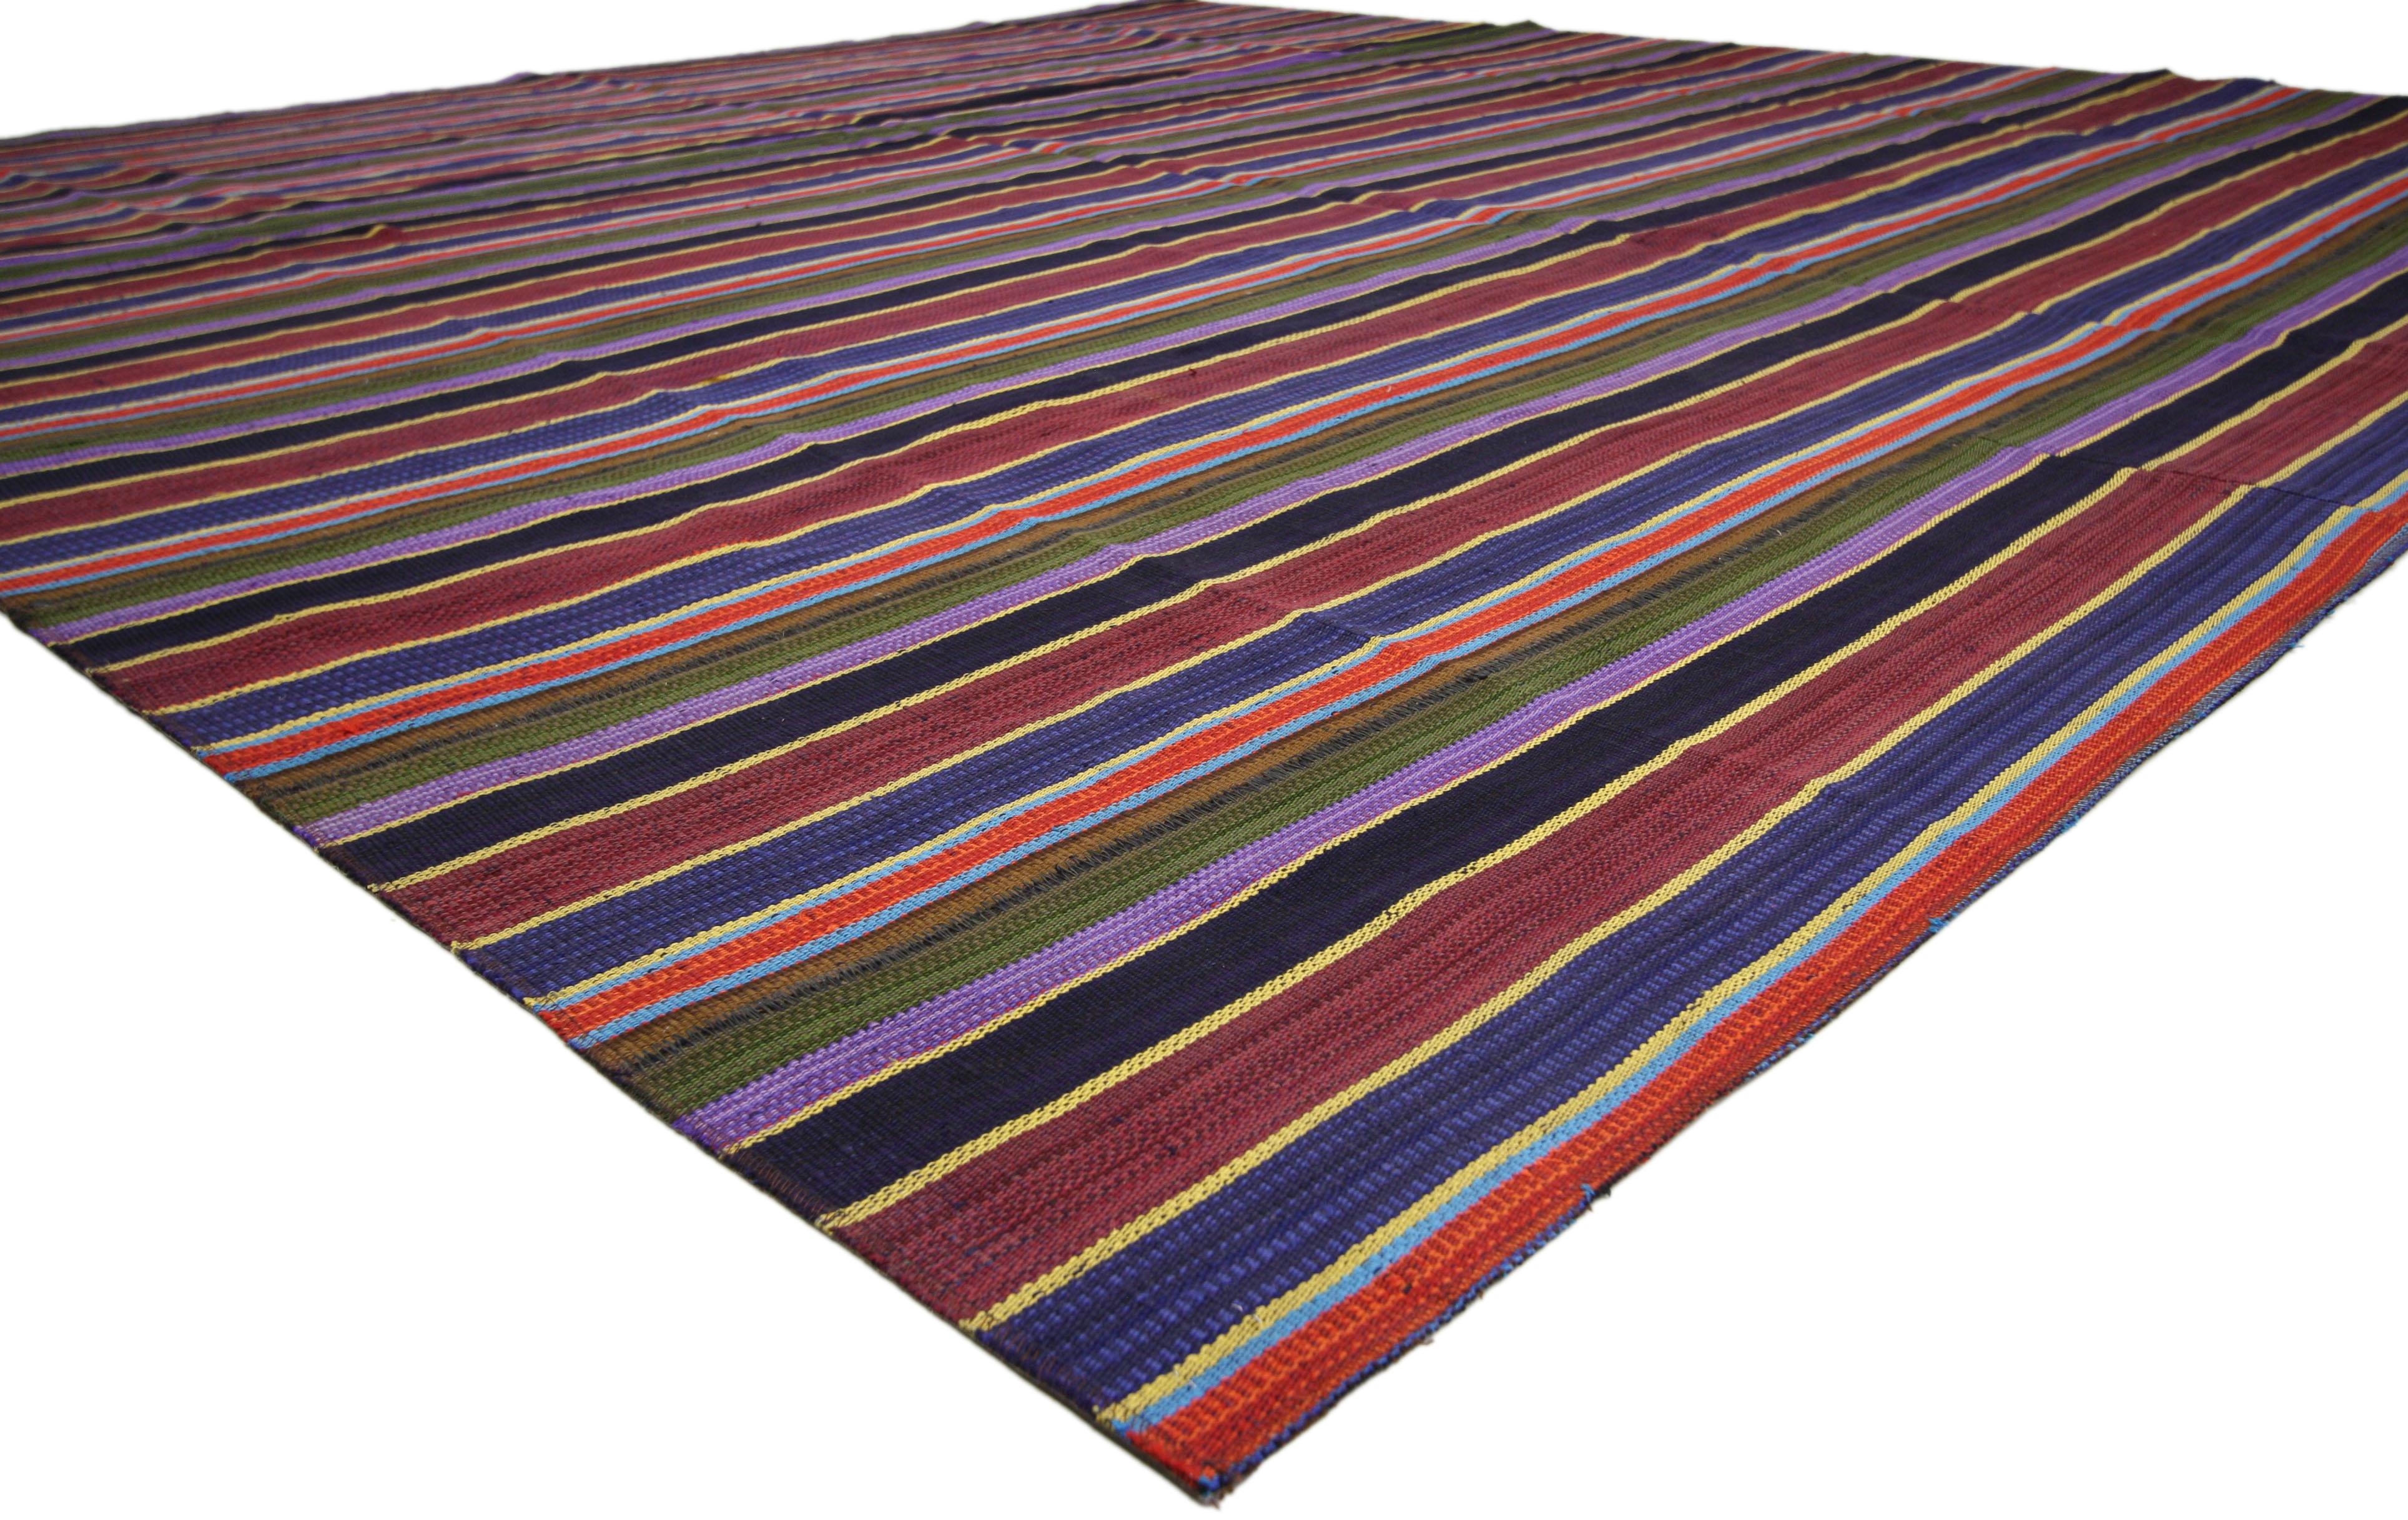 Hand-Woven Vintage Turkish Striped Kilim Rug, Timeless Elegance Meets Perpetually Posh For Sale